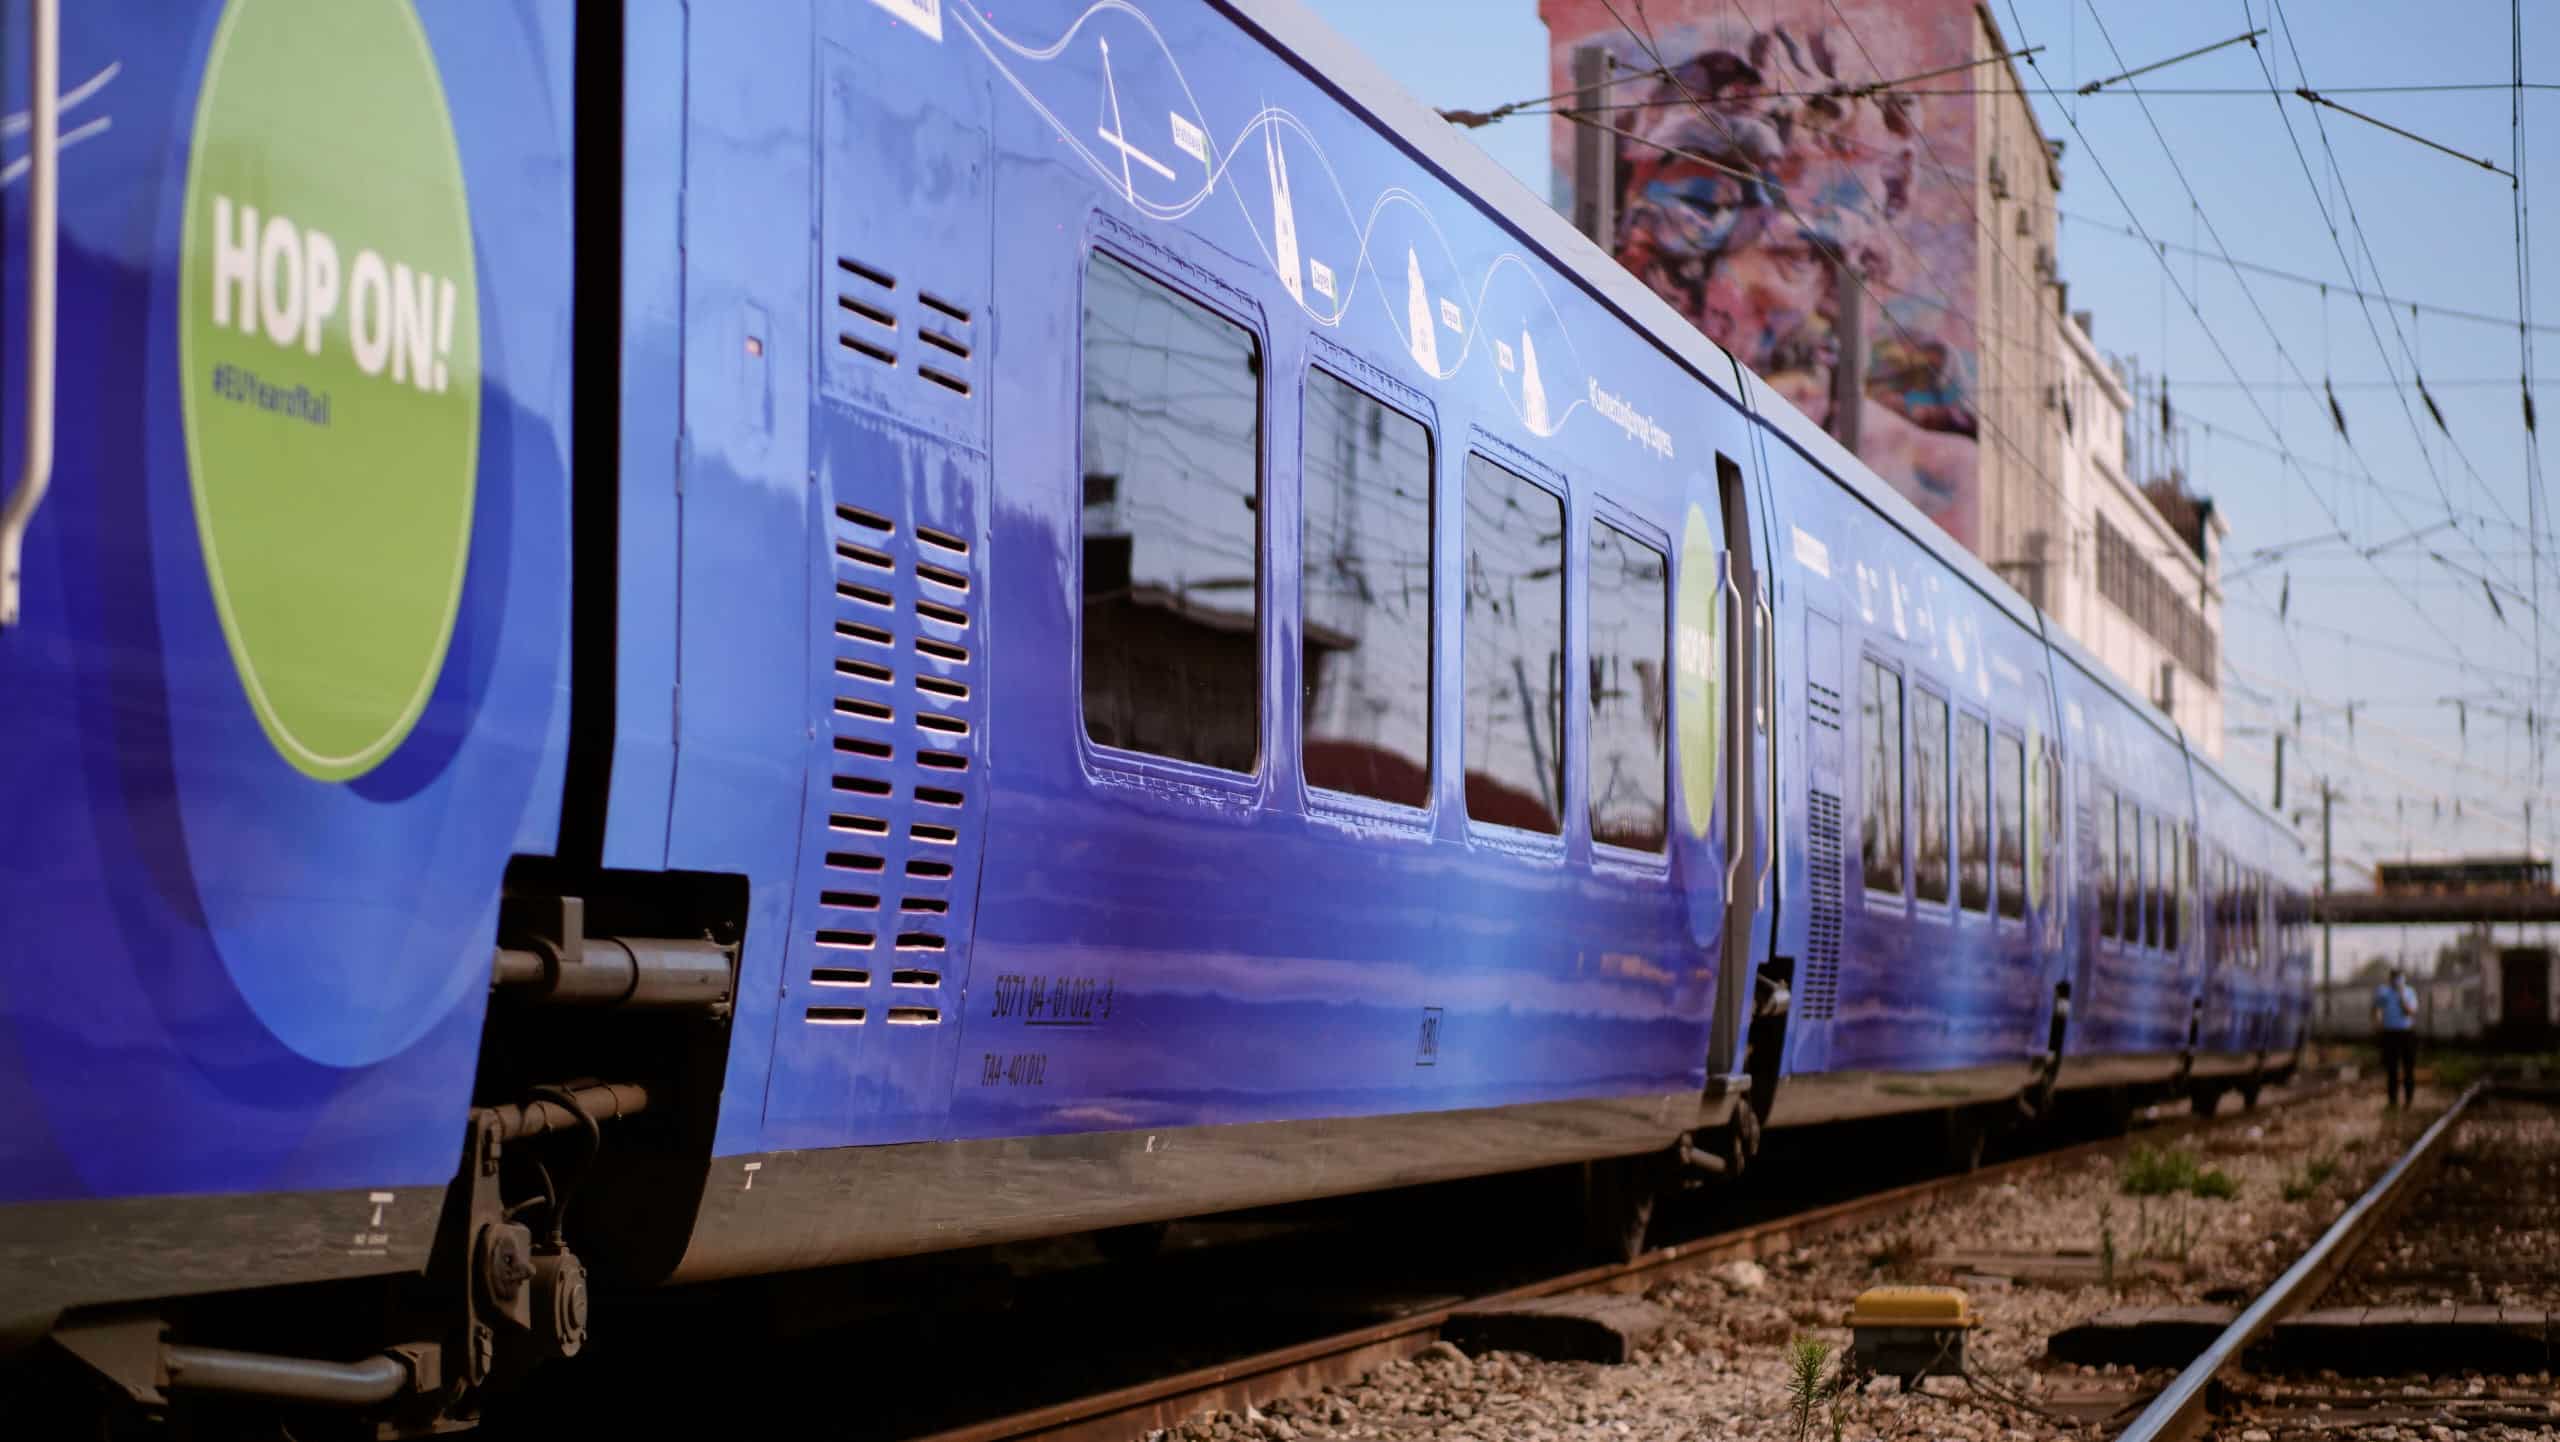 EU promoting sustainable travel through train crossing 26 countries